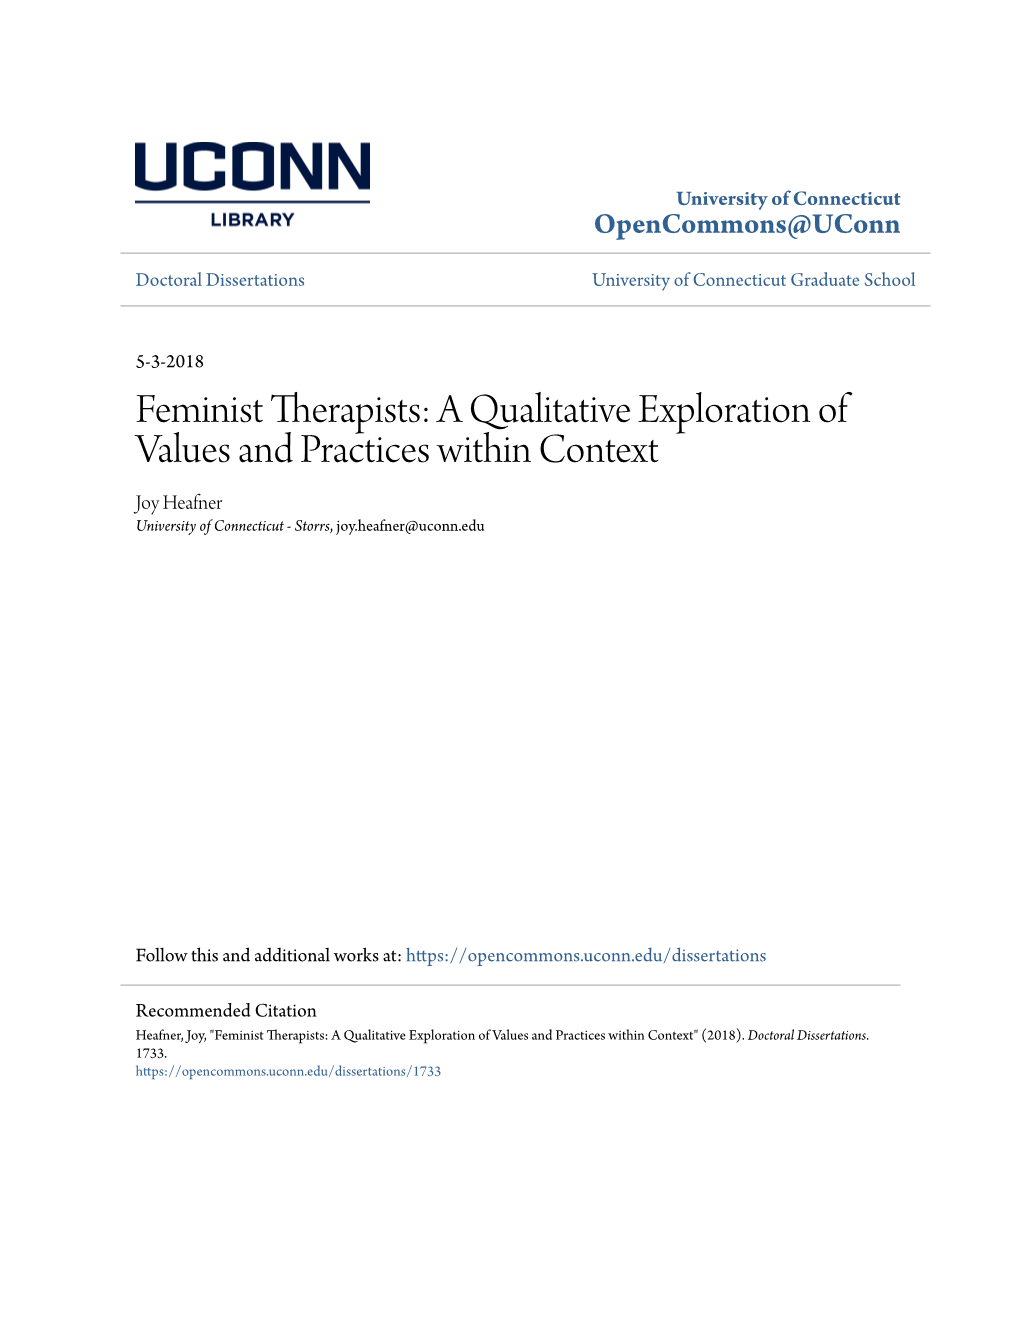 Feminist Therapists: a Qualitative Exploration of Values and Practices Within Context Joy Heafner University of Connecticut - Storrs, Joy.Heafner@Uconn.Edu